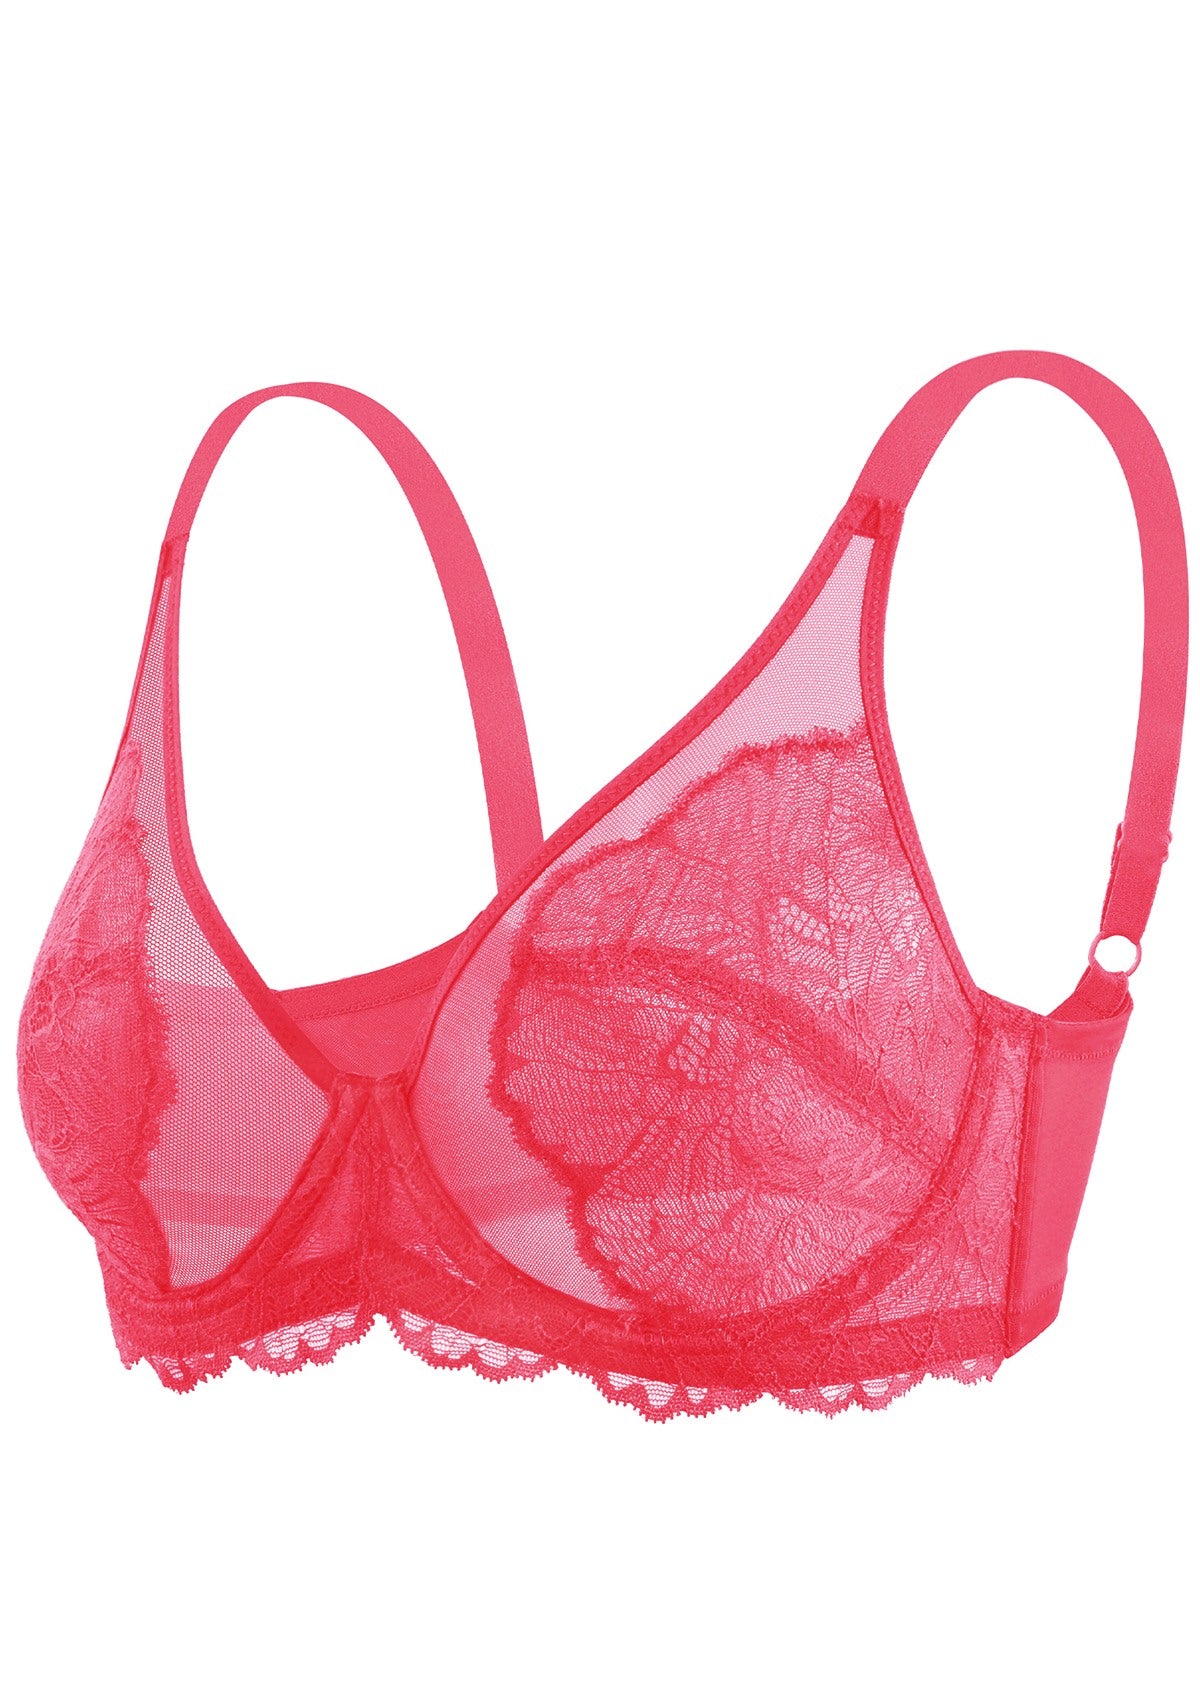 HSIA Blossom Unlined Lace Underwire Bra - Raspberry / 40 / D